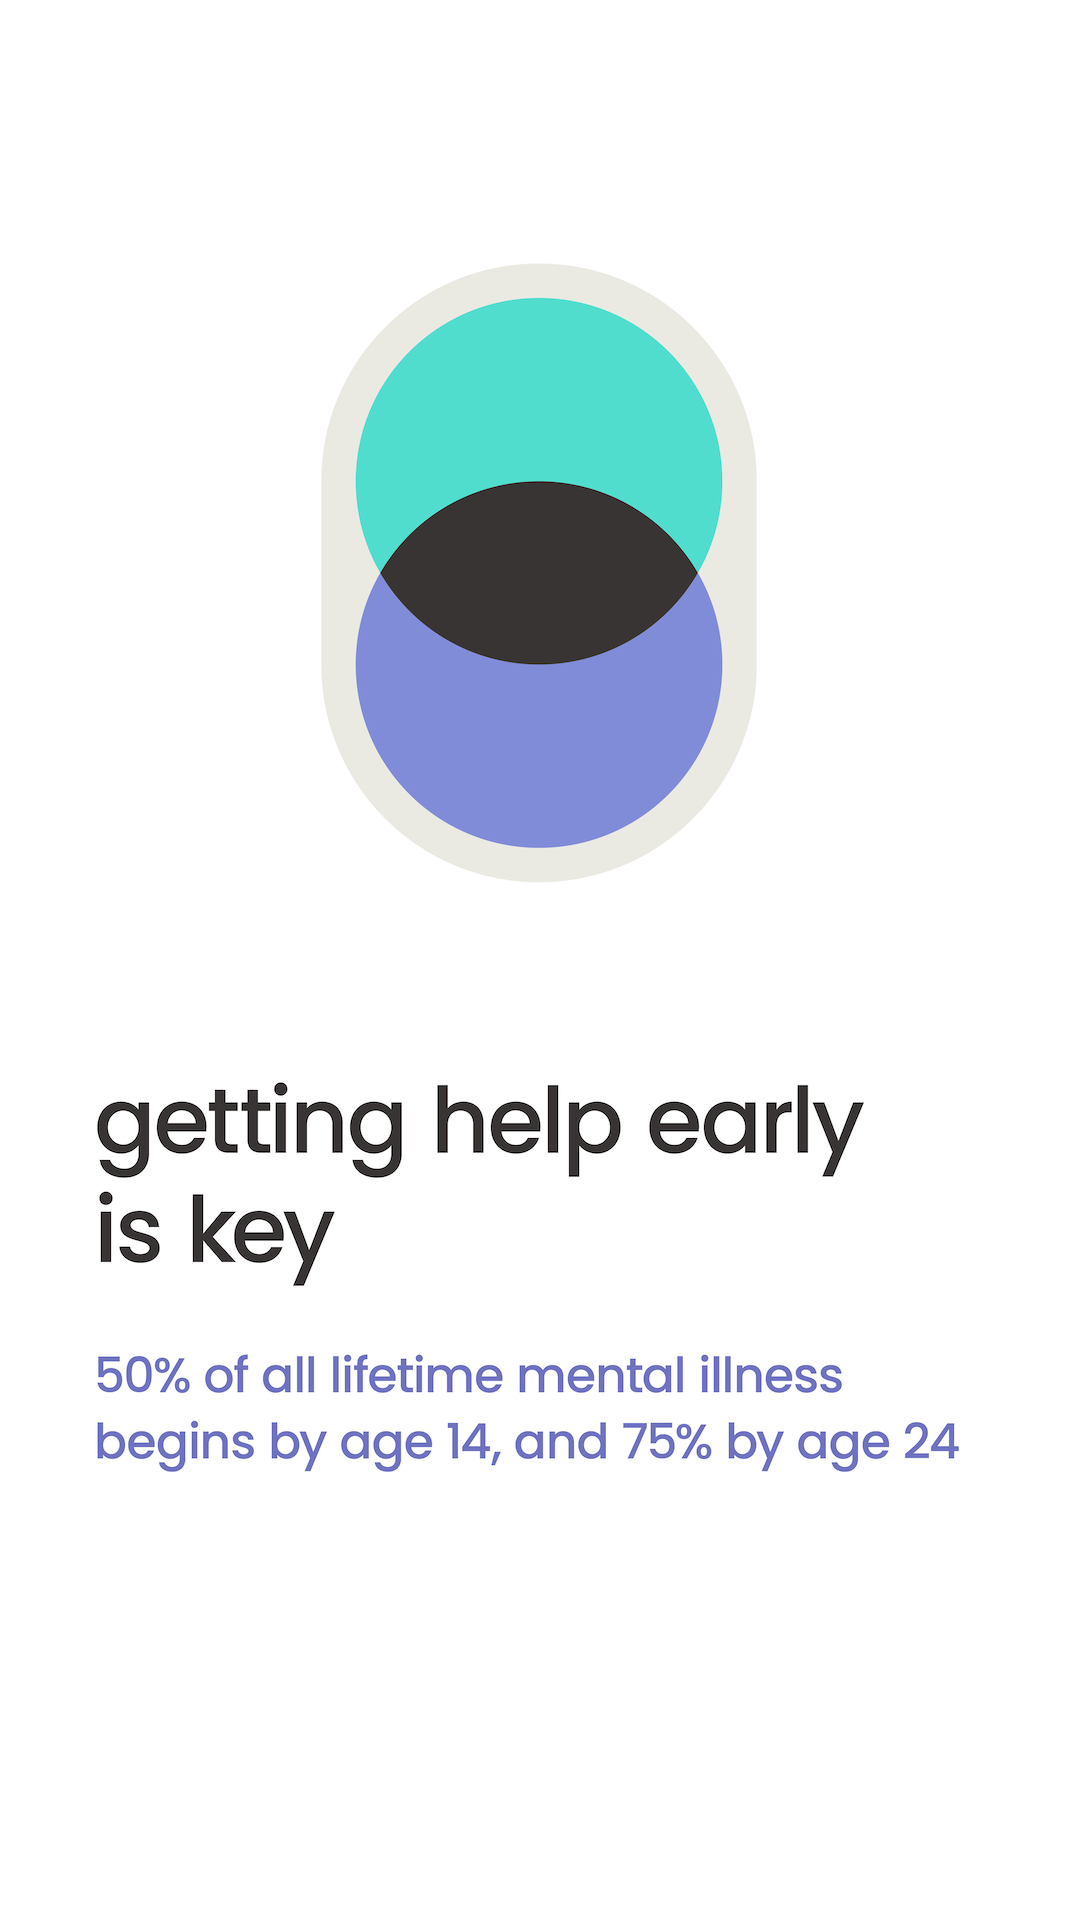 Getting help early is key. 50% of all lifetime mental illness begins by age 14, and 75% by age 24.